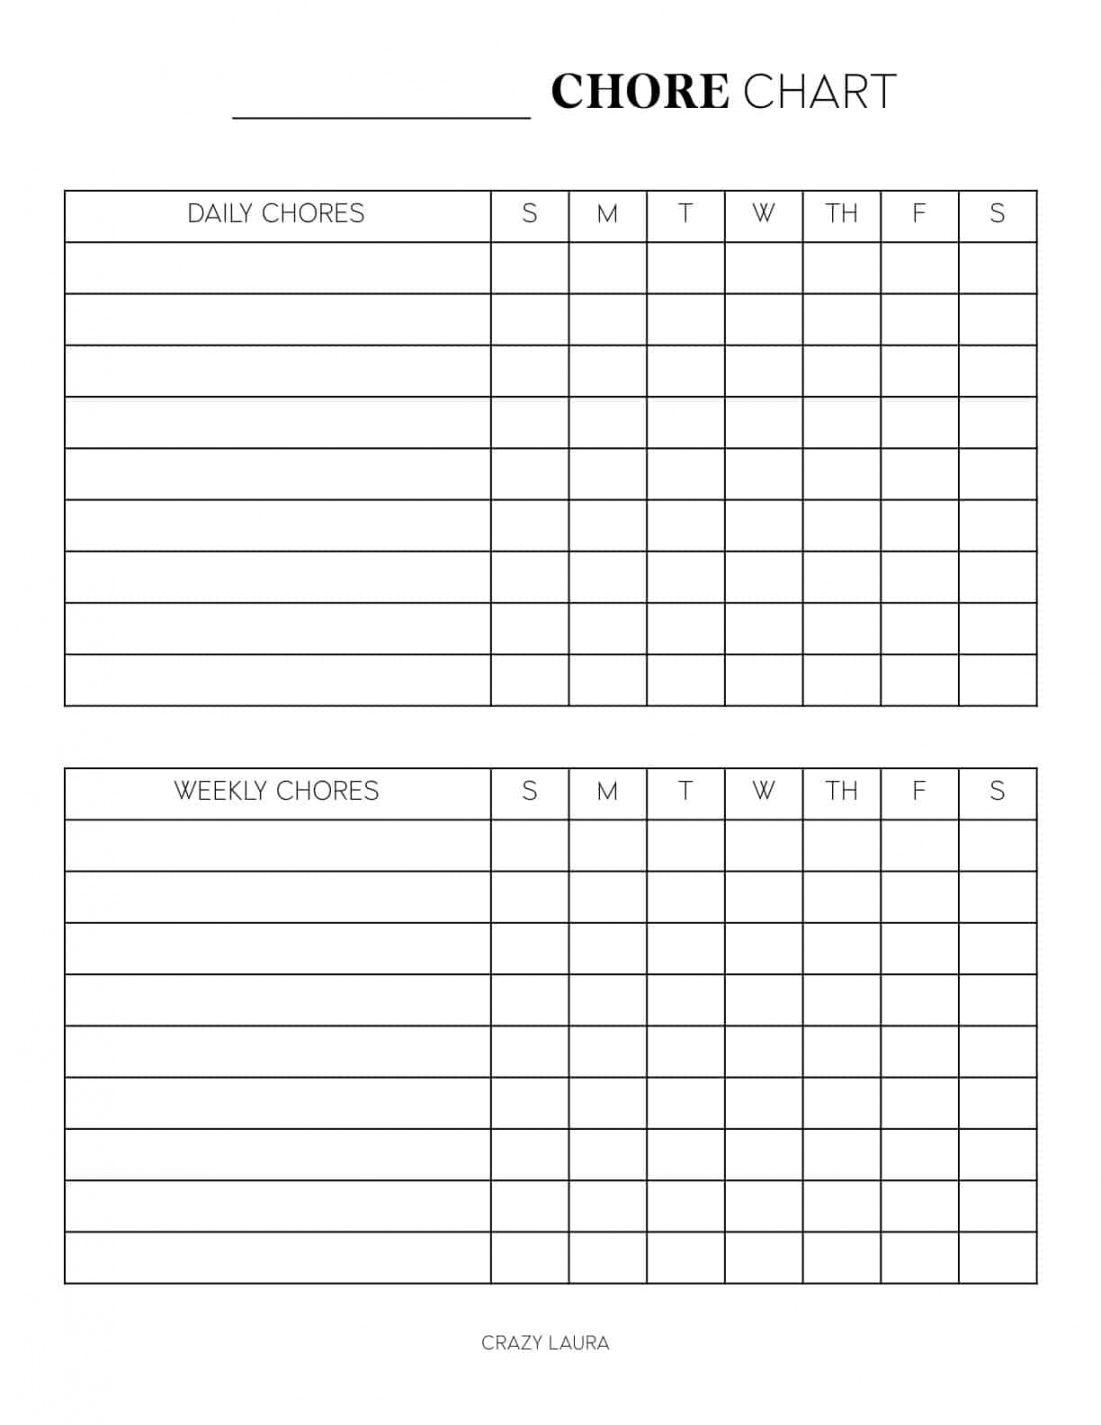 Free Chore Chart Printable With Weekly and Daily Versions - Crazy  - FREE Printables - Pdf Free Printable Chore Charts